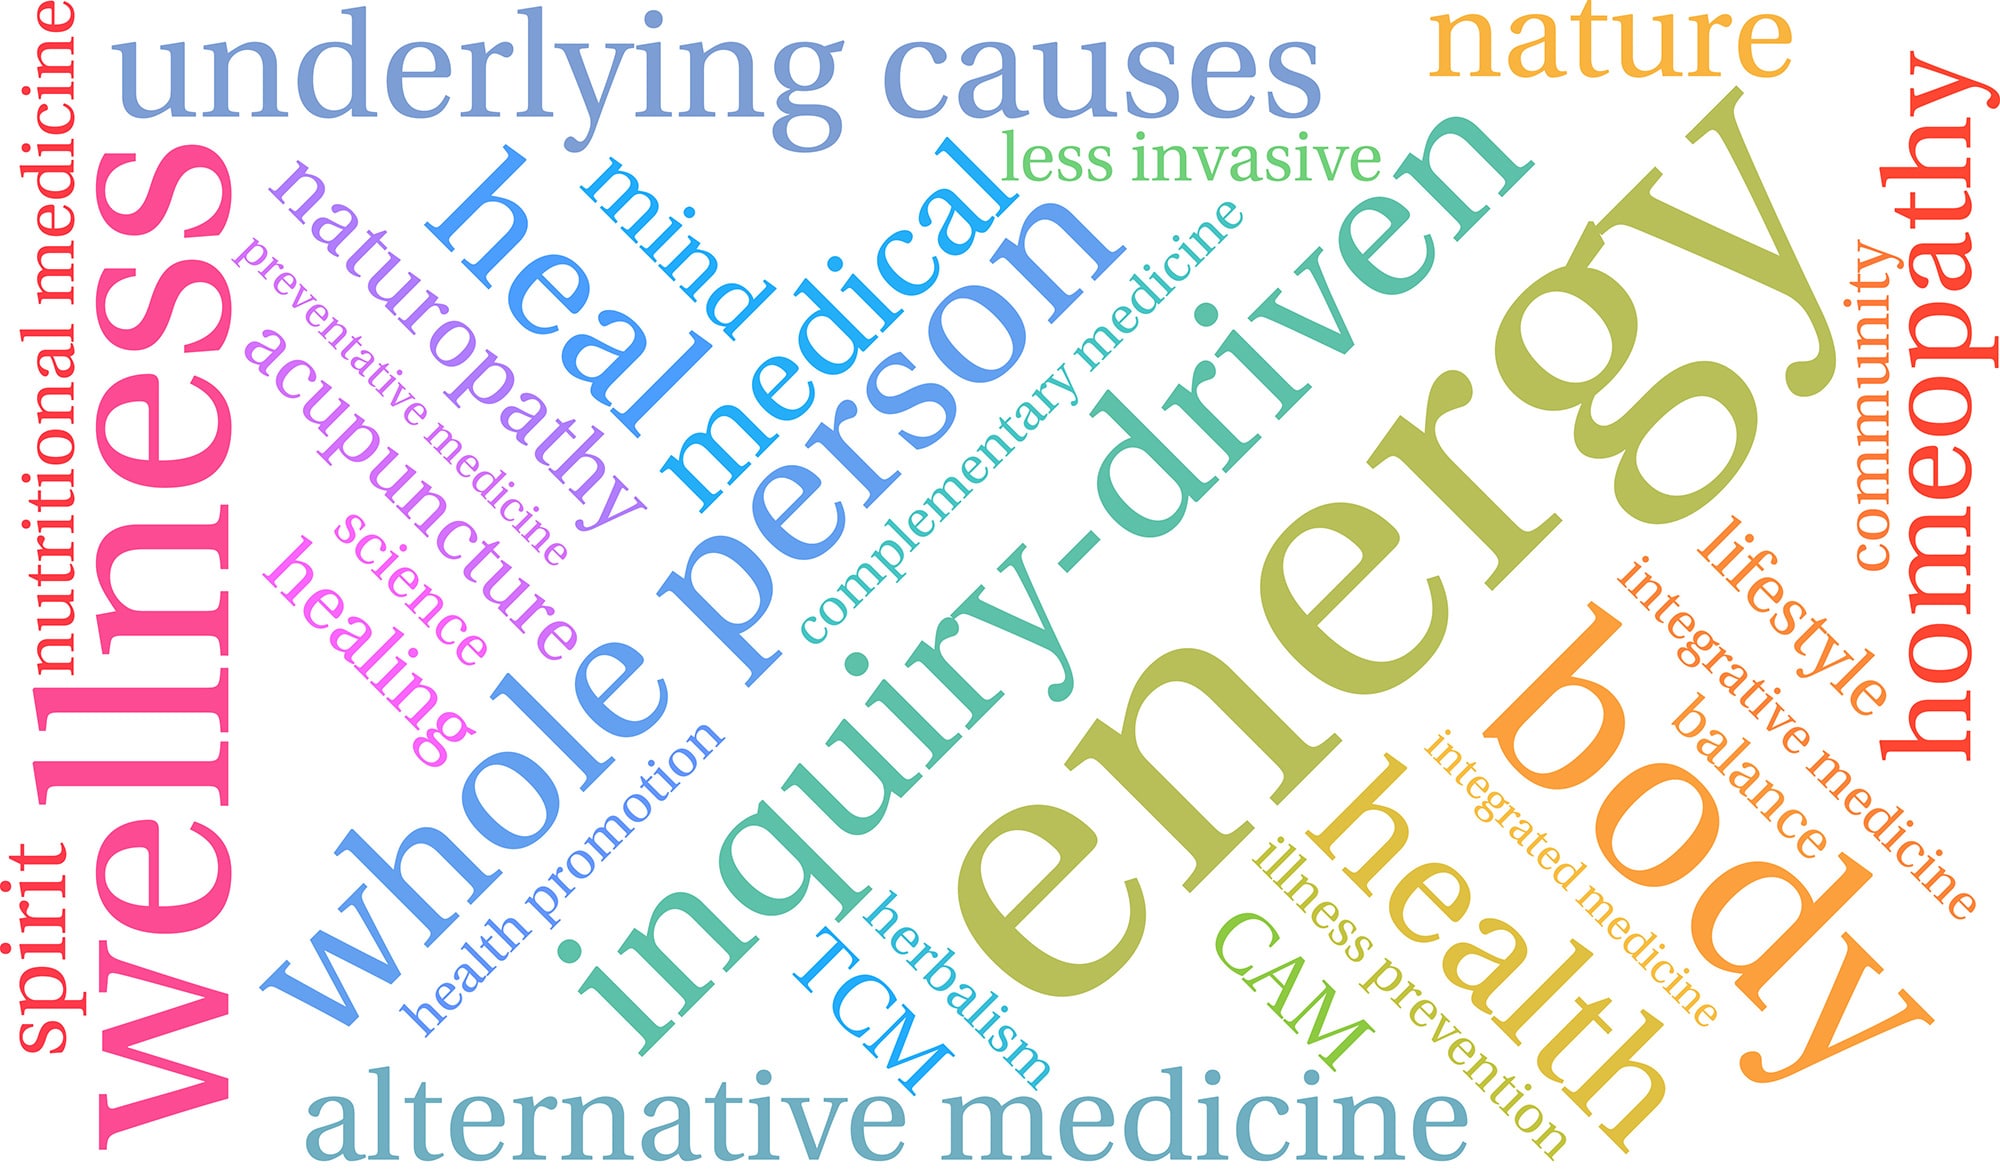 Image of various words related to functional medicine in Sydney.